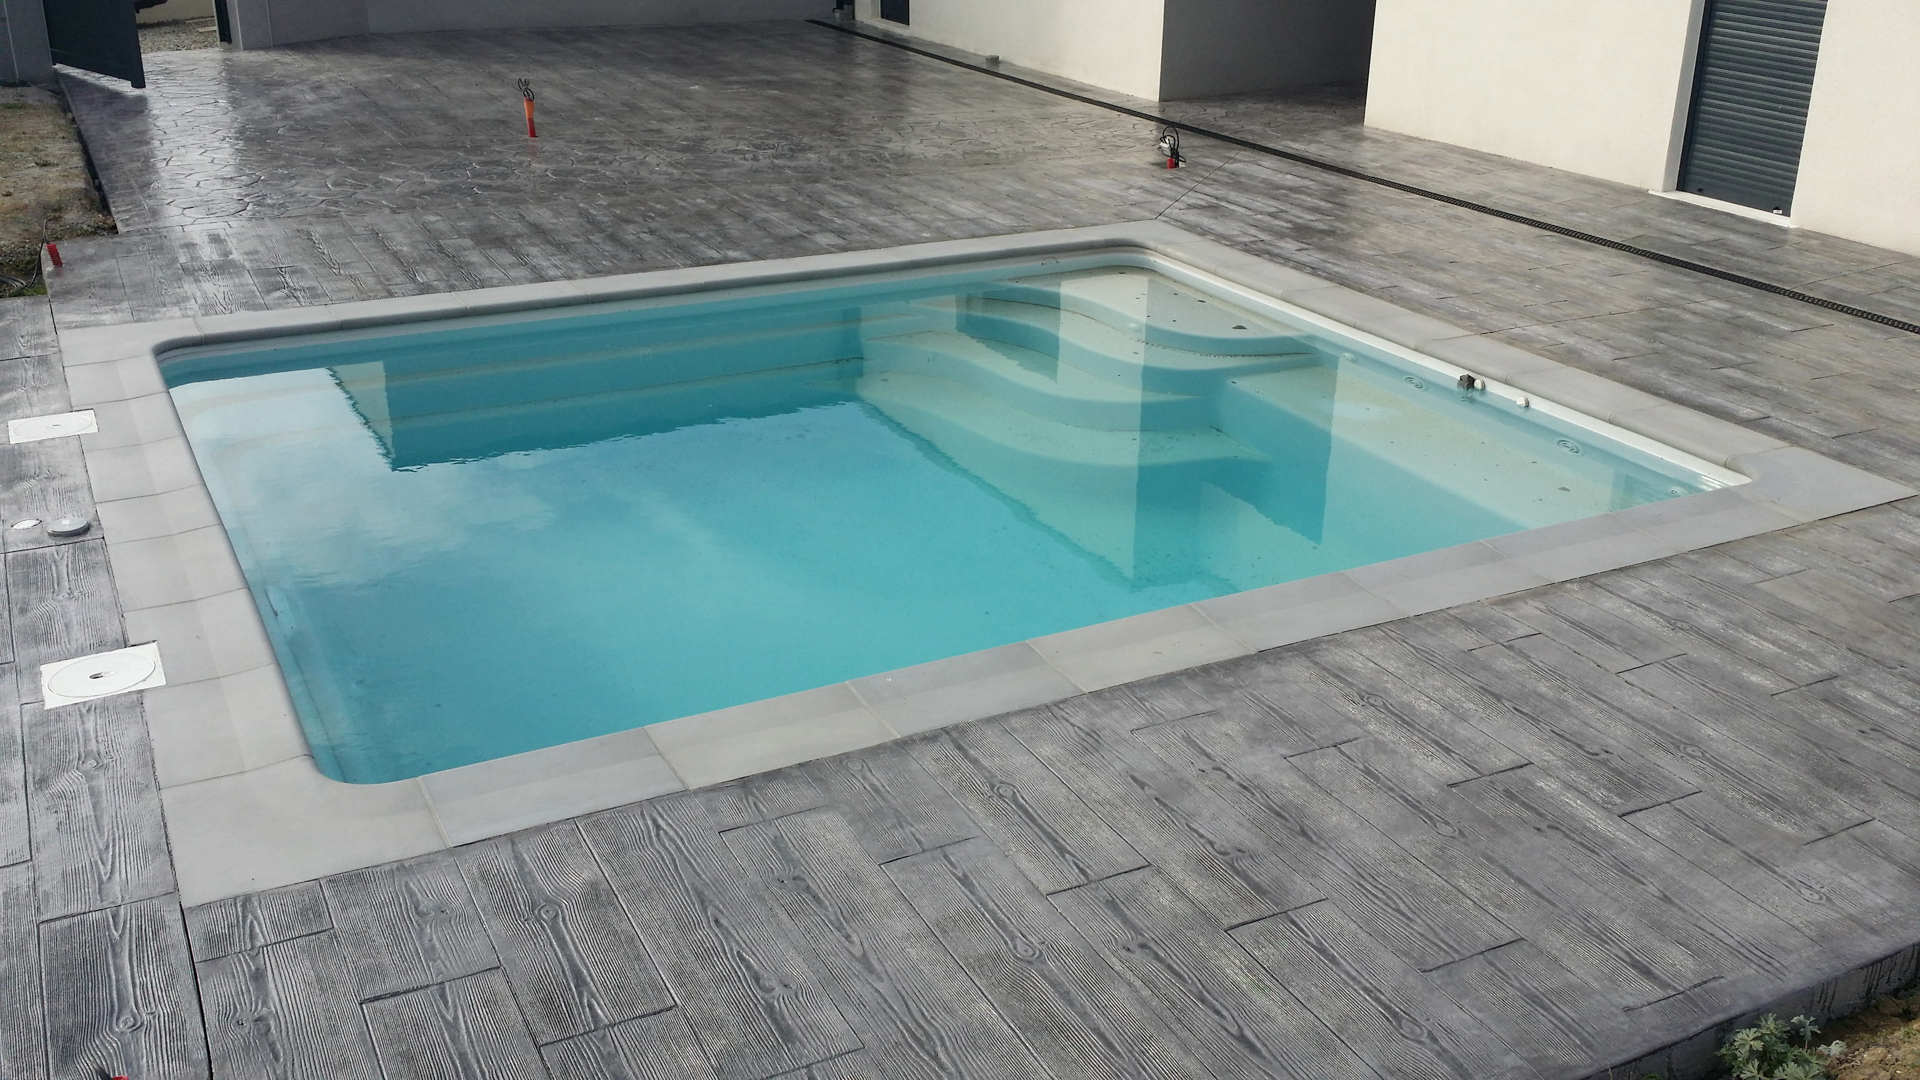  swimming pool with wood imitation stamped concrete